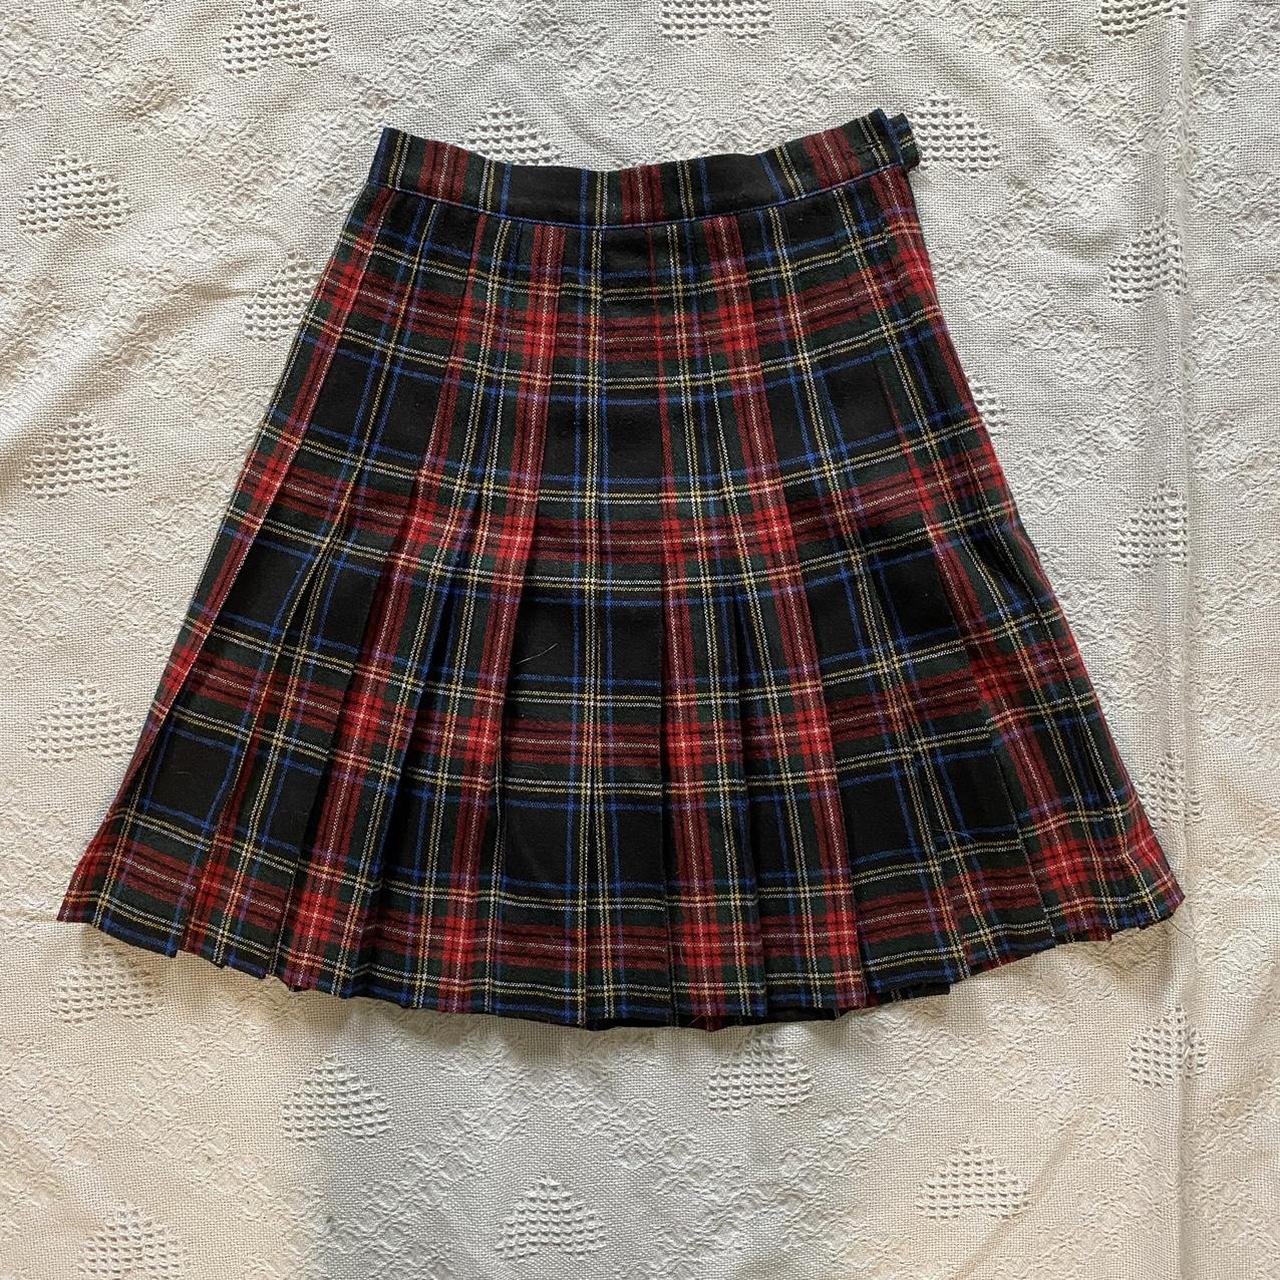 VINTAGE PLAID PLEATED SKIRT literally the perfect... - Depop